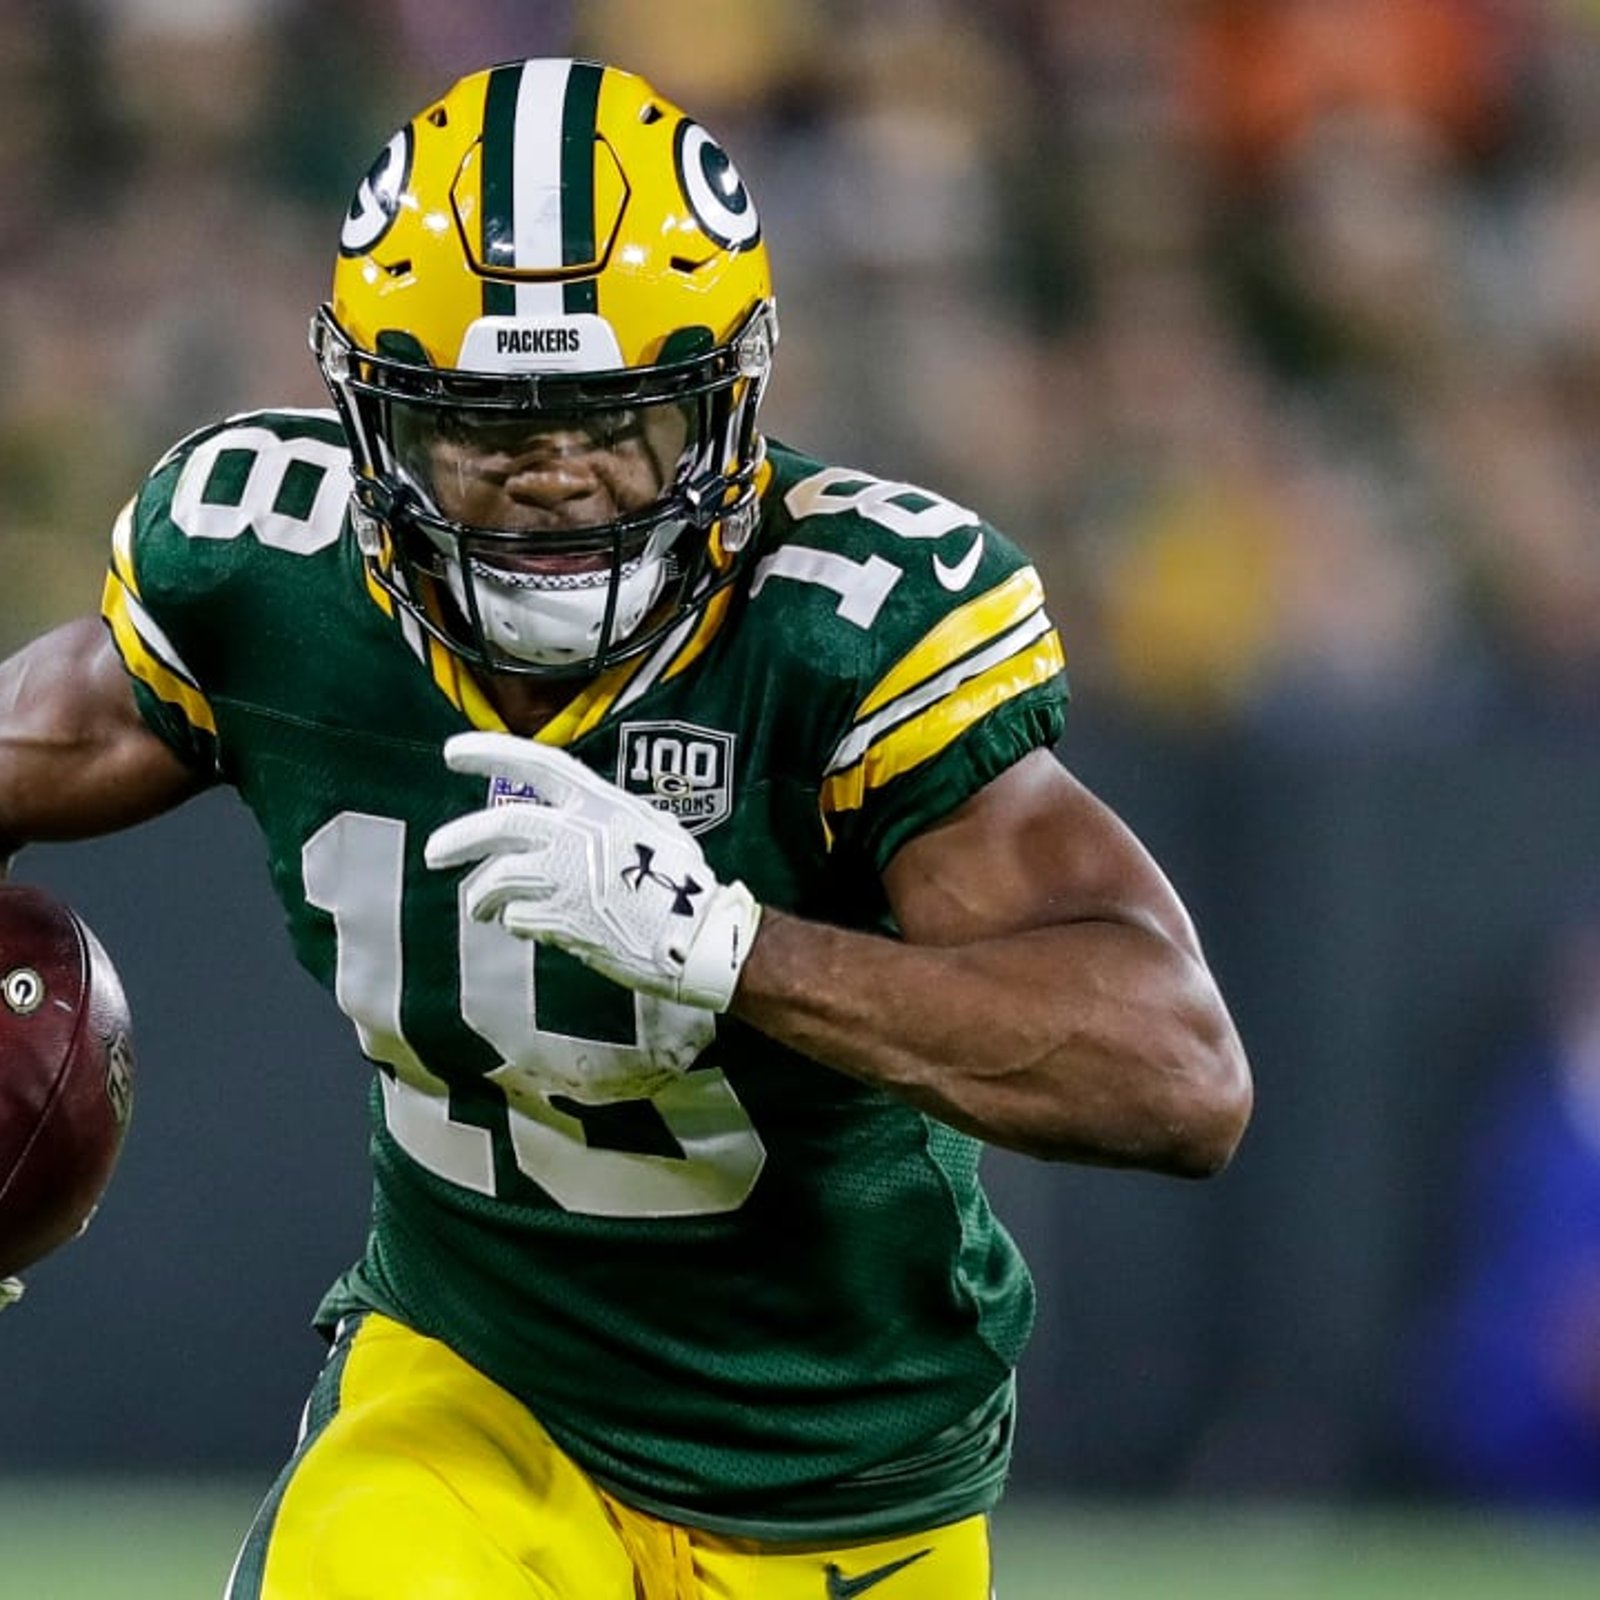 Randall Cobb &amp; family survive frightening house fire 